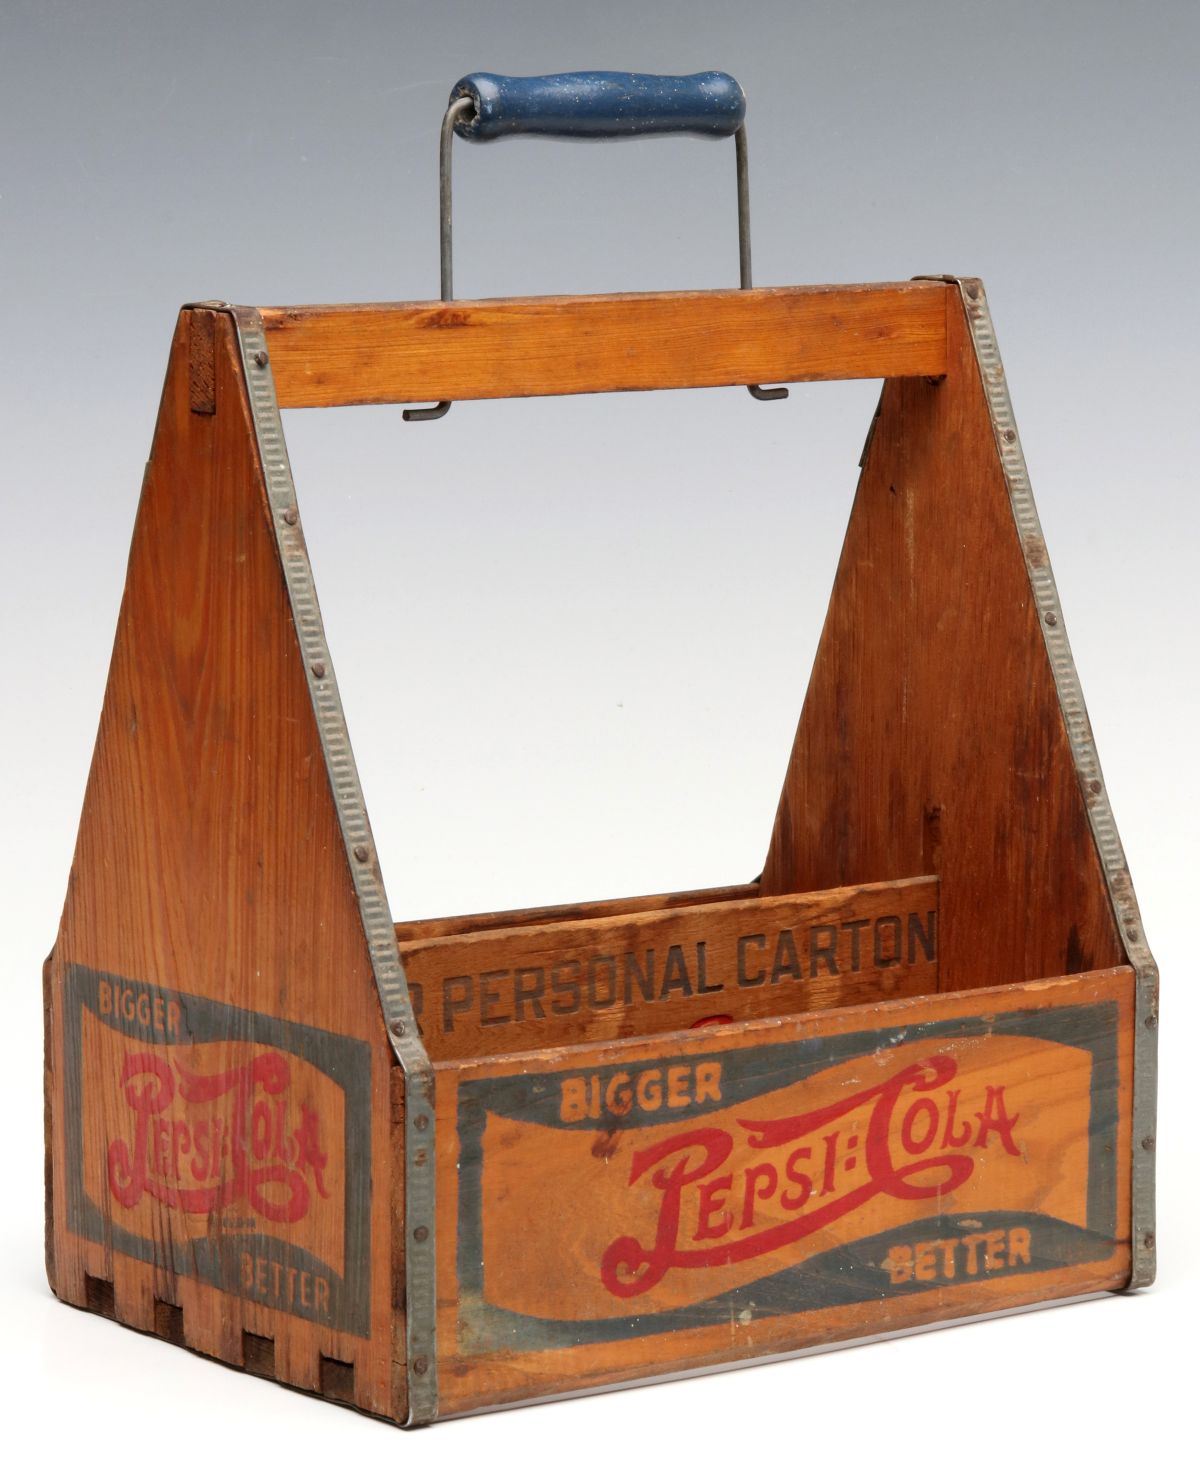 A PAIR OF PEPSI-COLA WOODEN BOTTLE CARRIERS CIRCA 1940s